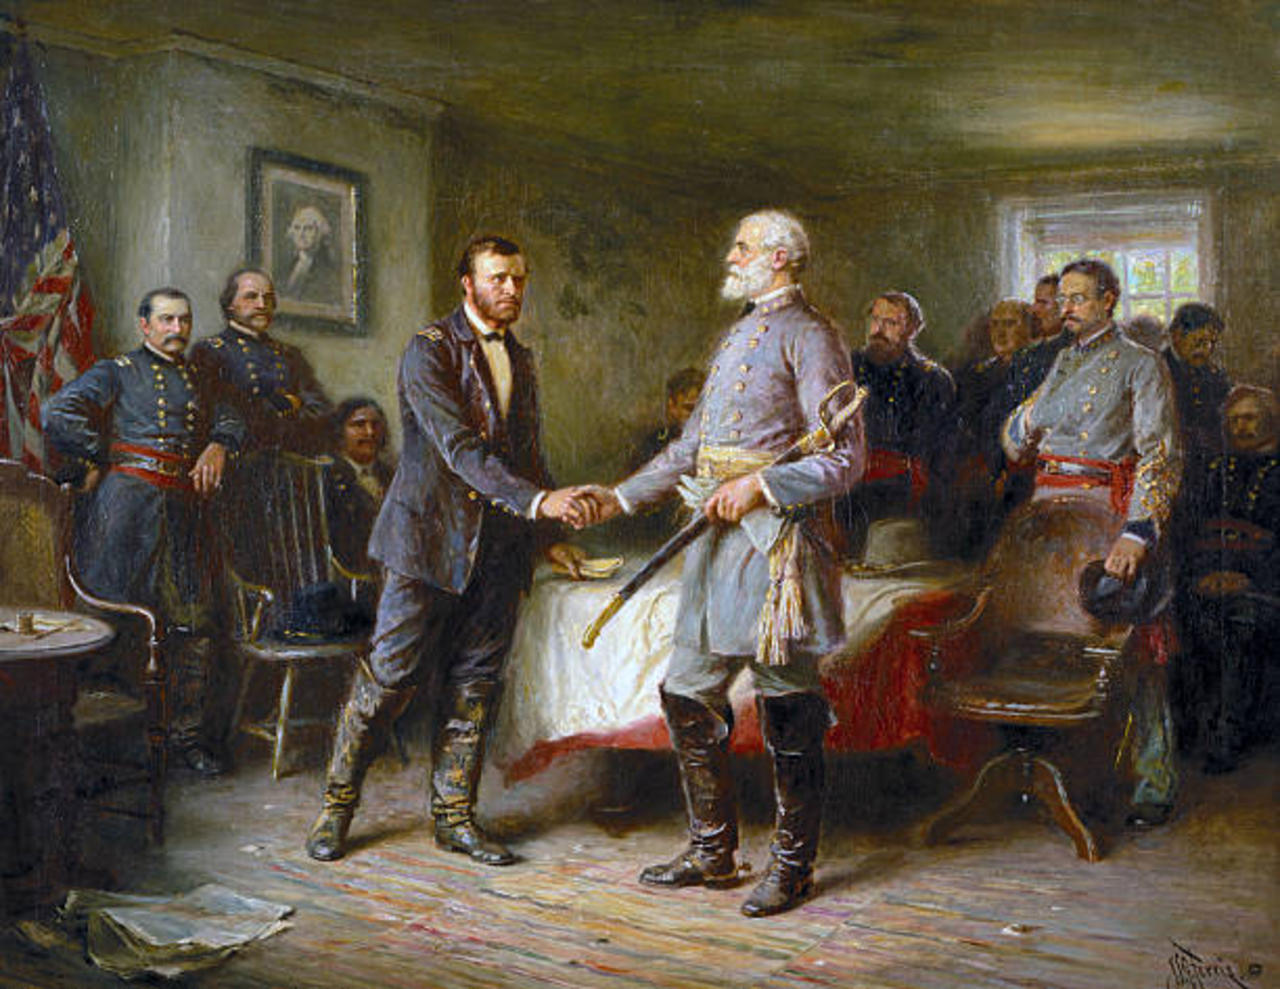 This Day in History: Robert E. Lee Surrenders